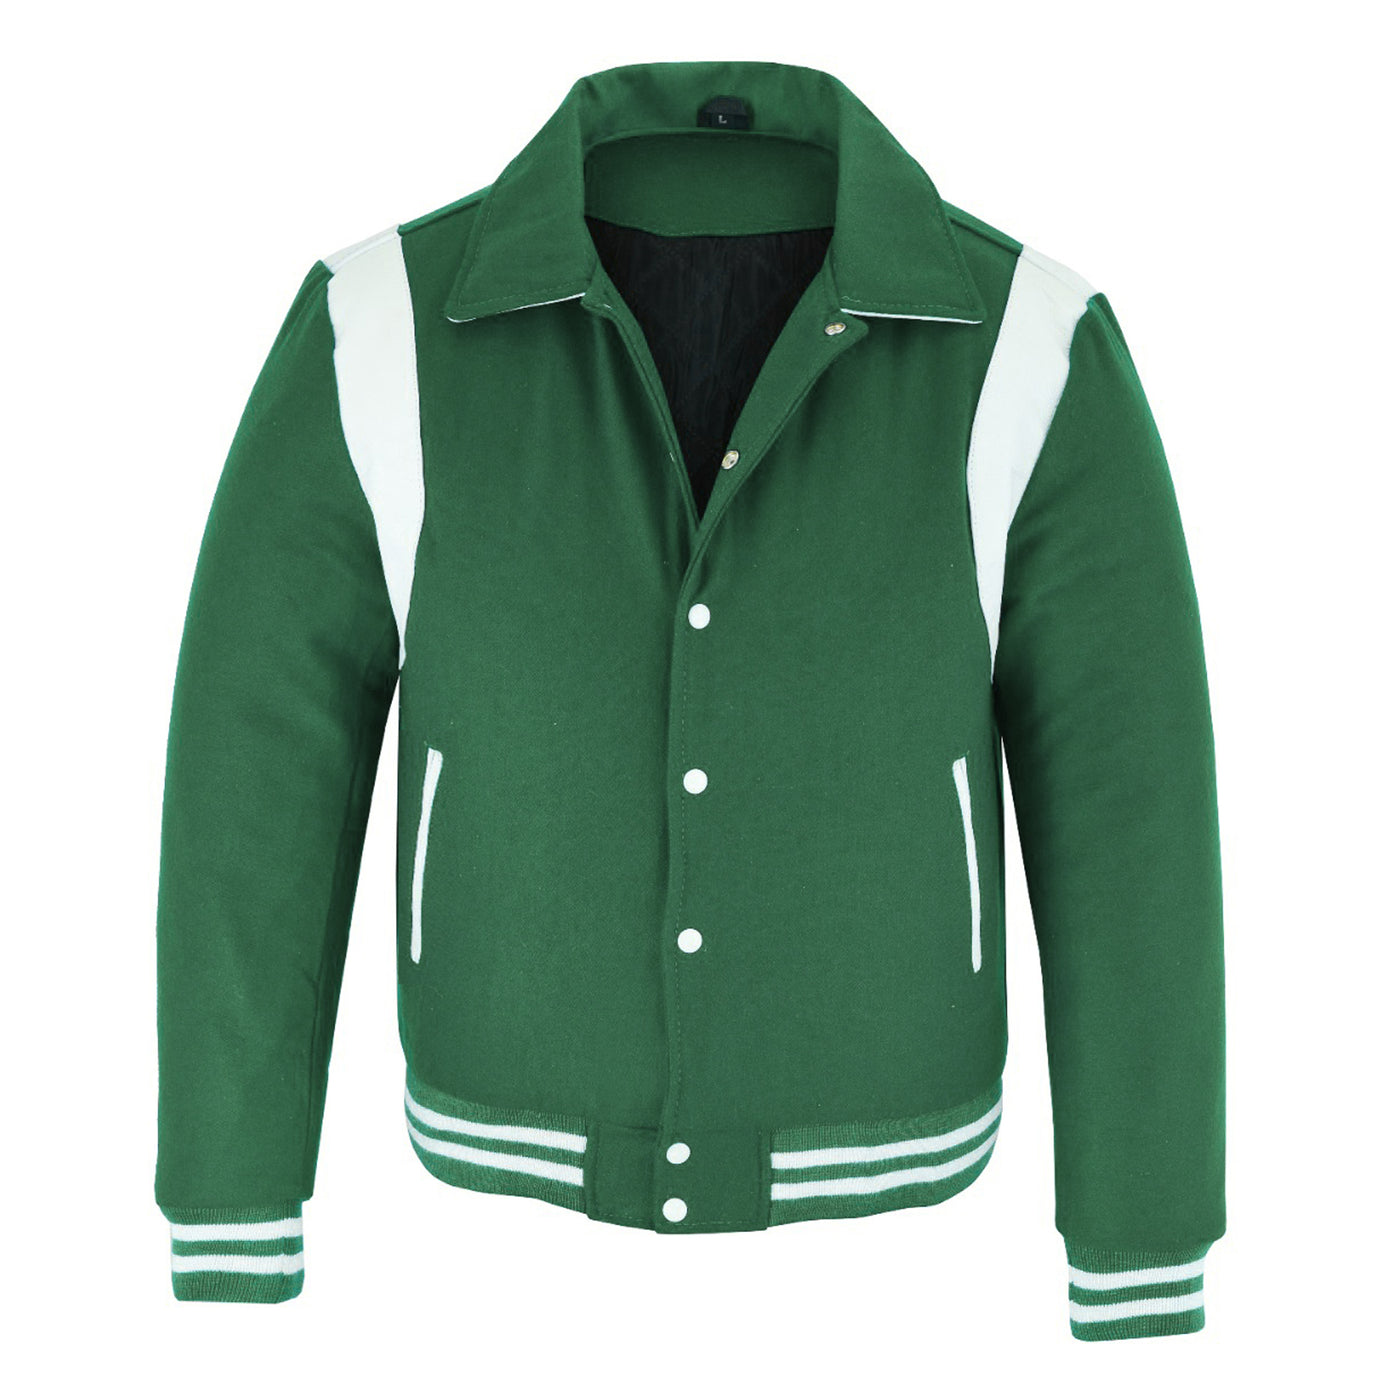 Classic Varsity Letterman Baseball College Jacket Green Wool with White Single Leather Strip